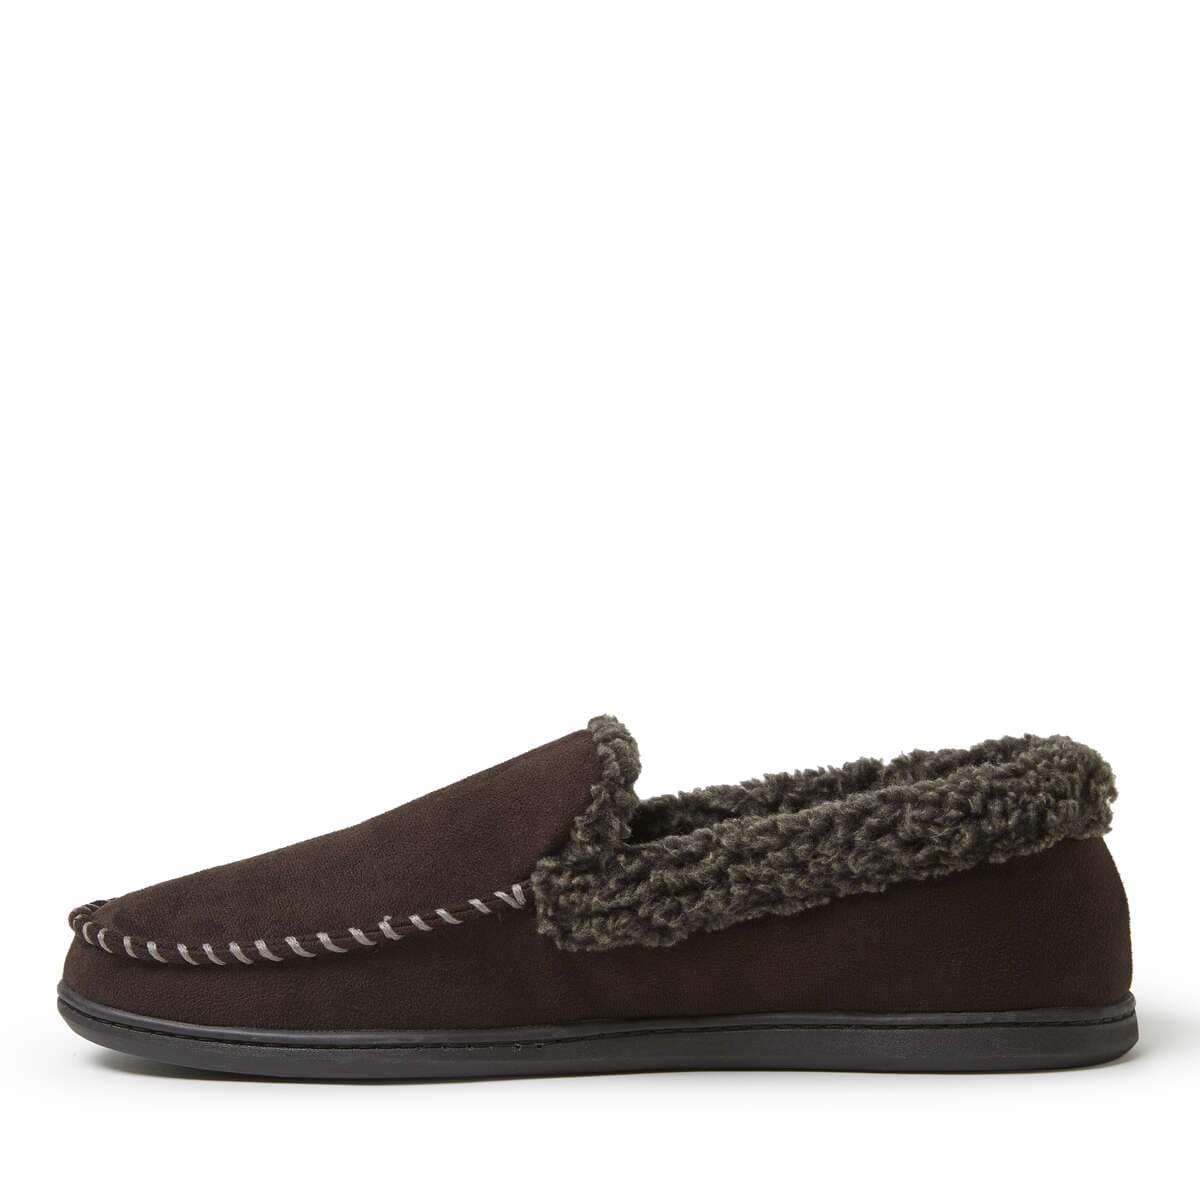 Eli Microsuede Moccasin product image